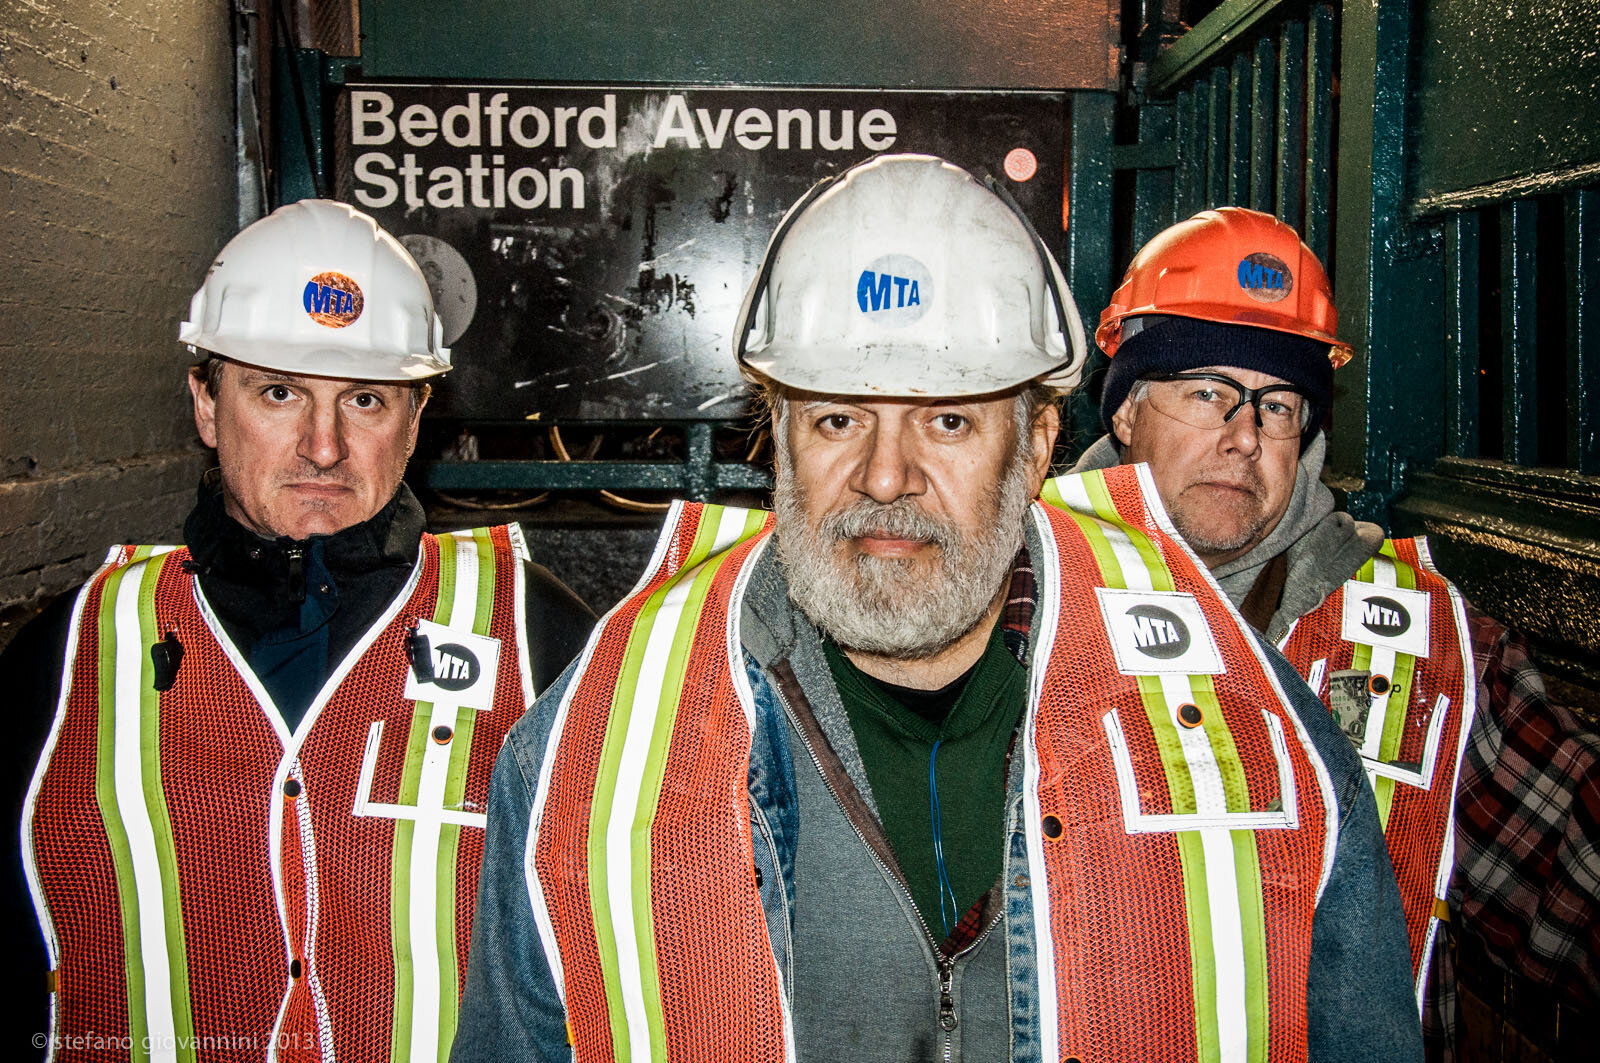  MTA supervisors in charge of draining the 1 mile  tunnel  flooded by hurricane Sandy between Bedford ave Brooklyn and 1st ave Manhattan.  